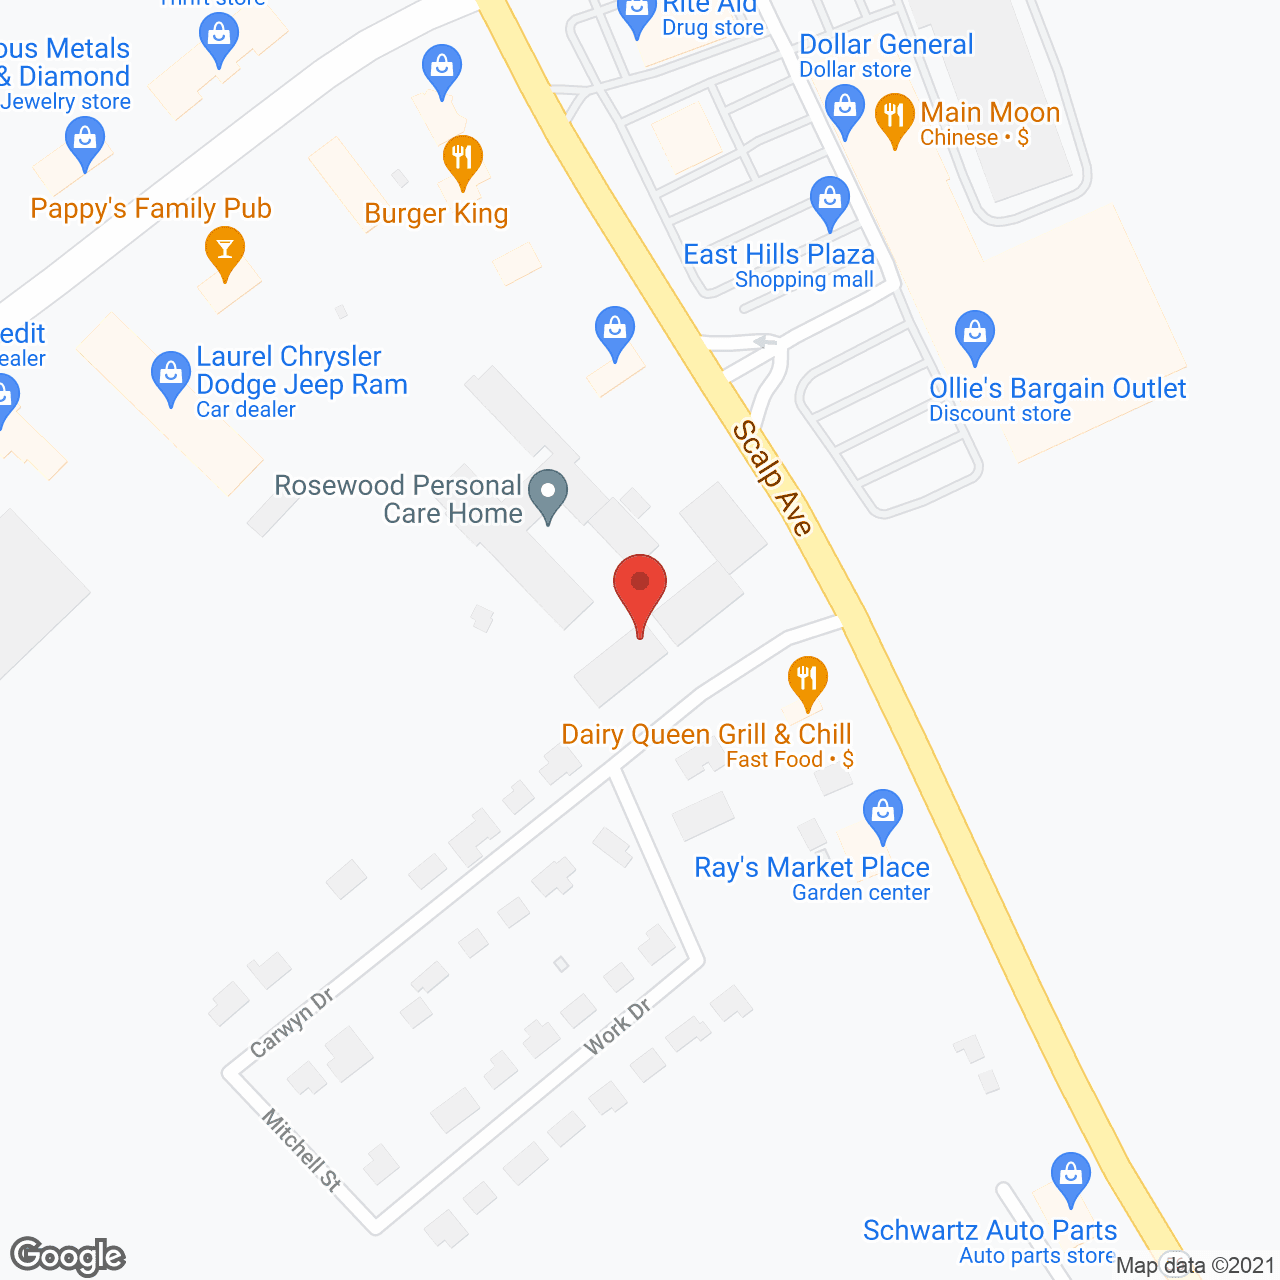 Rosewood Personal Care Home in google map